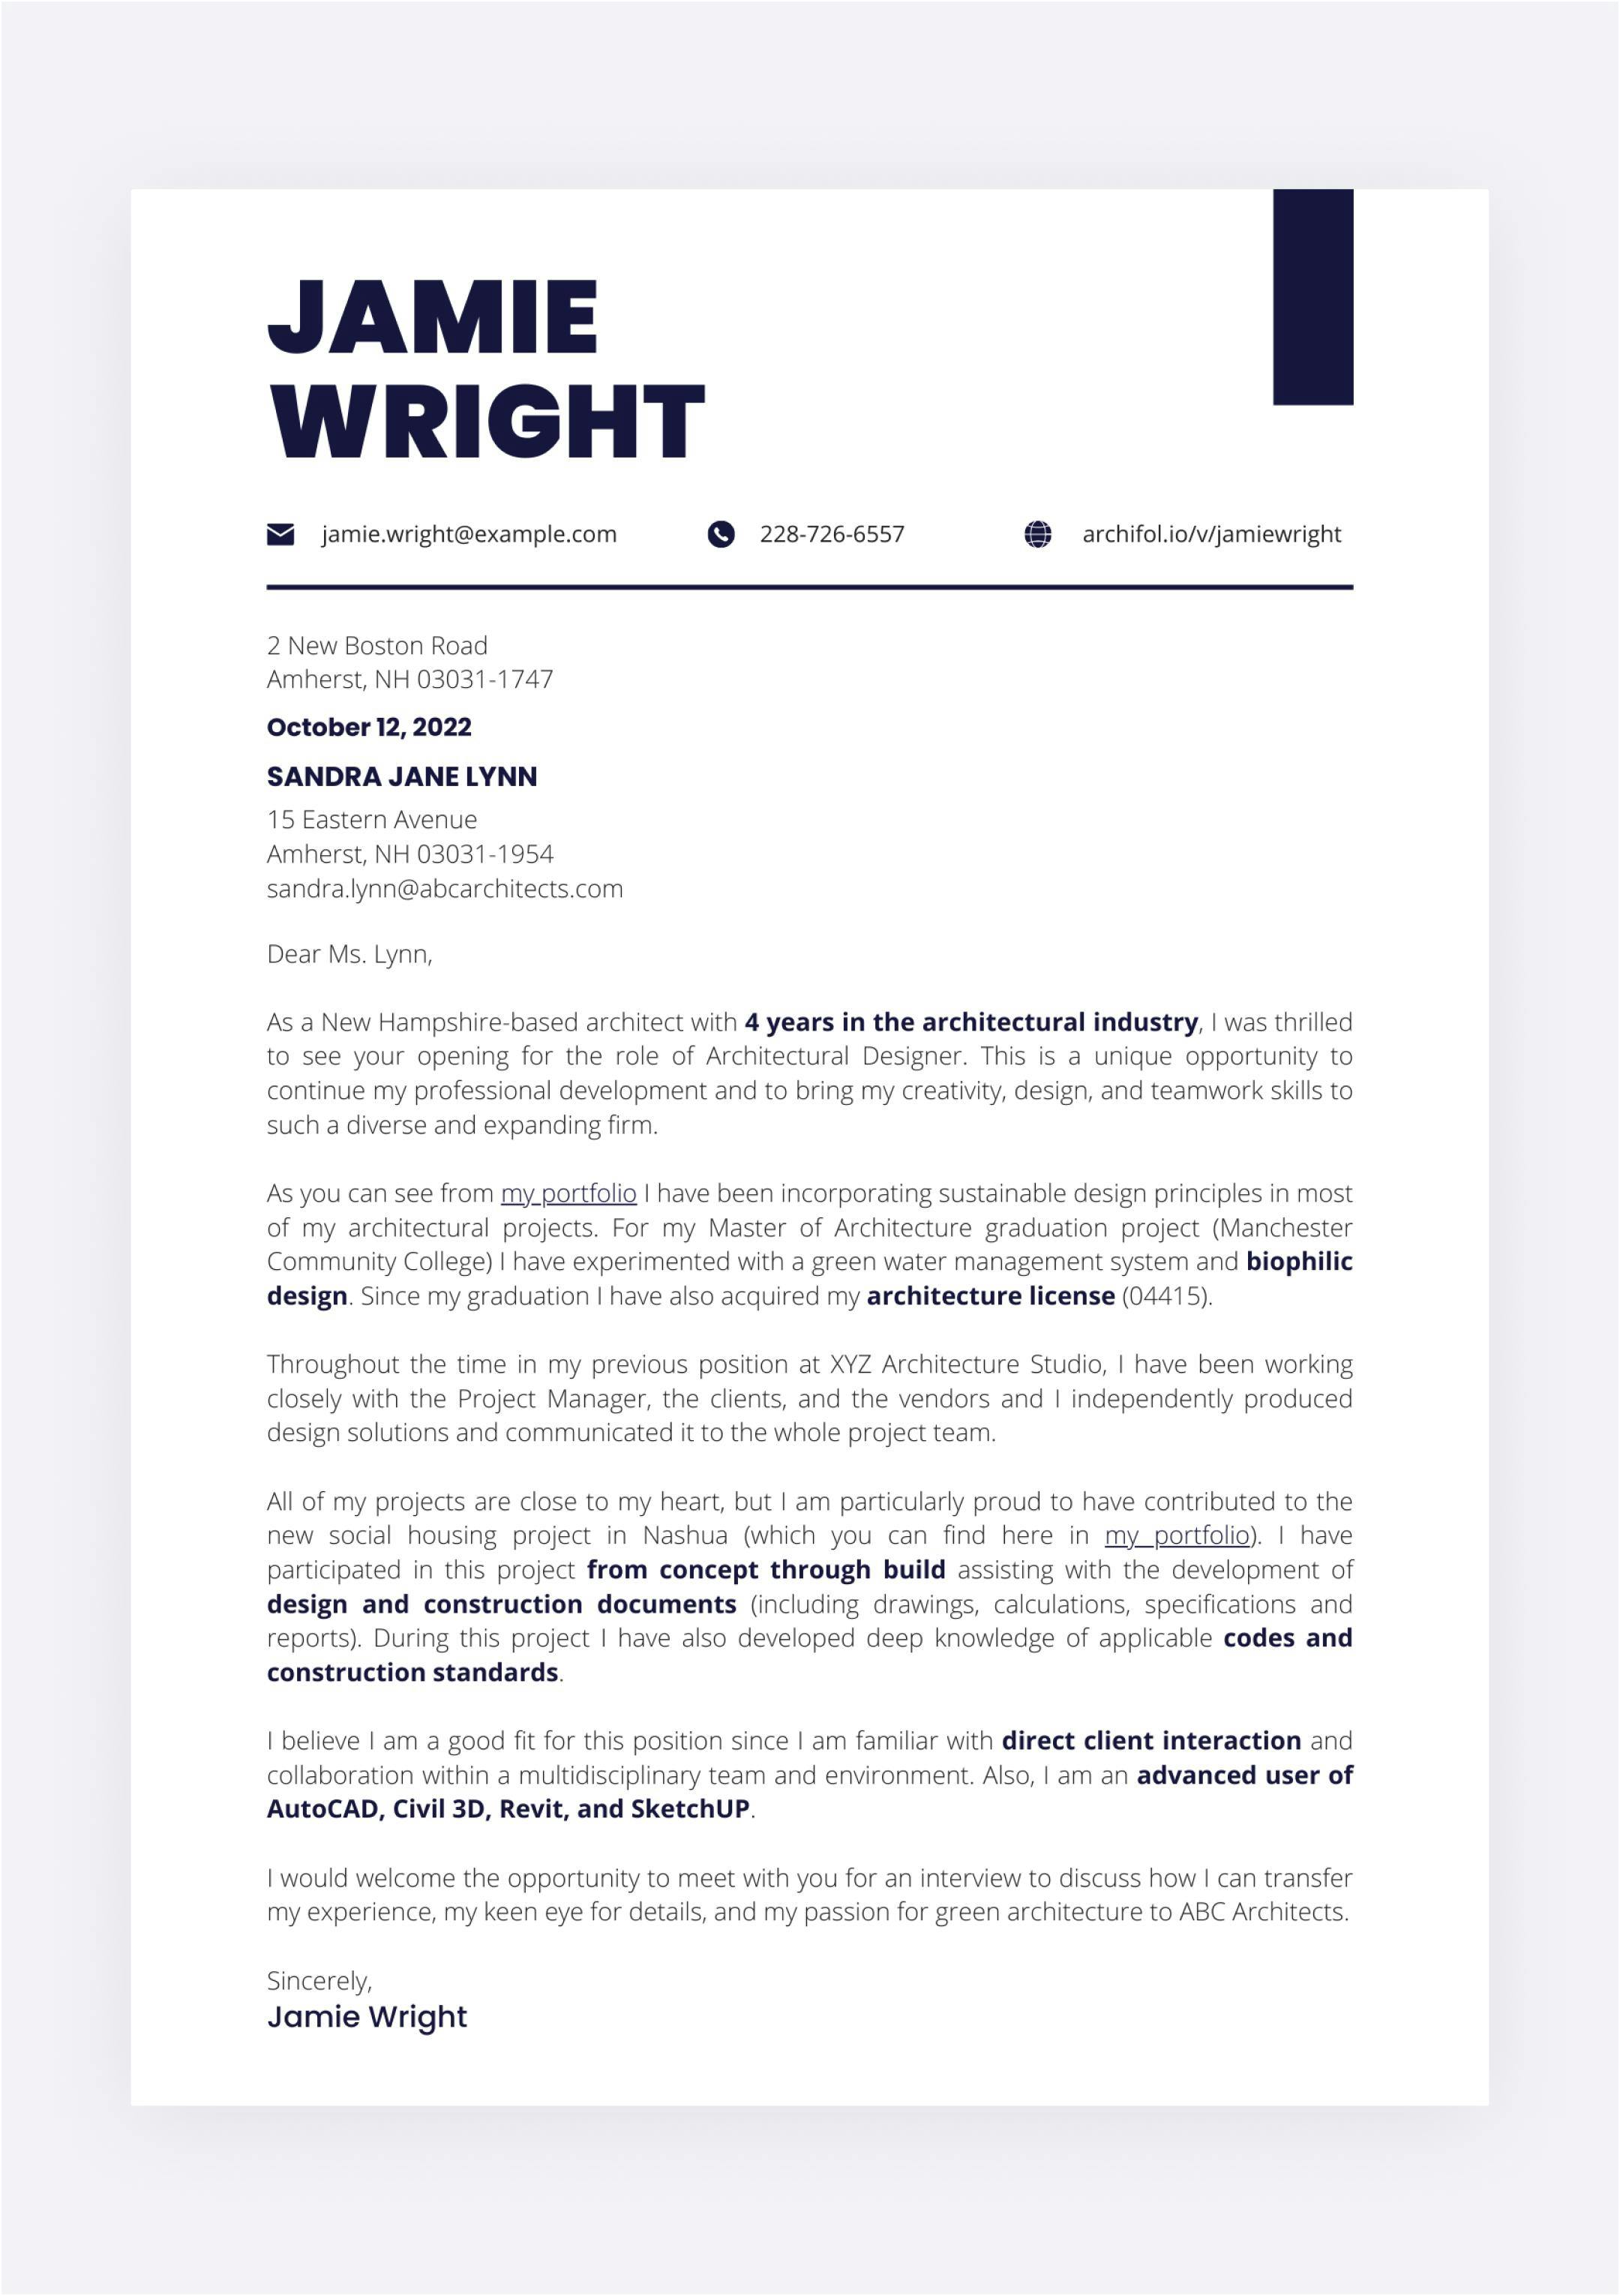 A cover letter example for architects. It has a minimal design almost black and white.